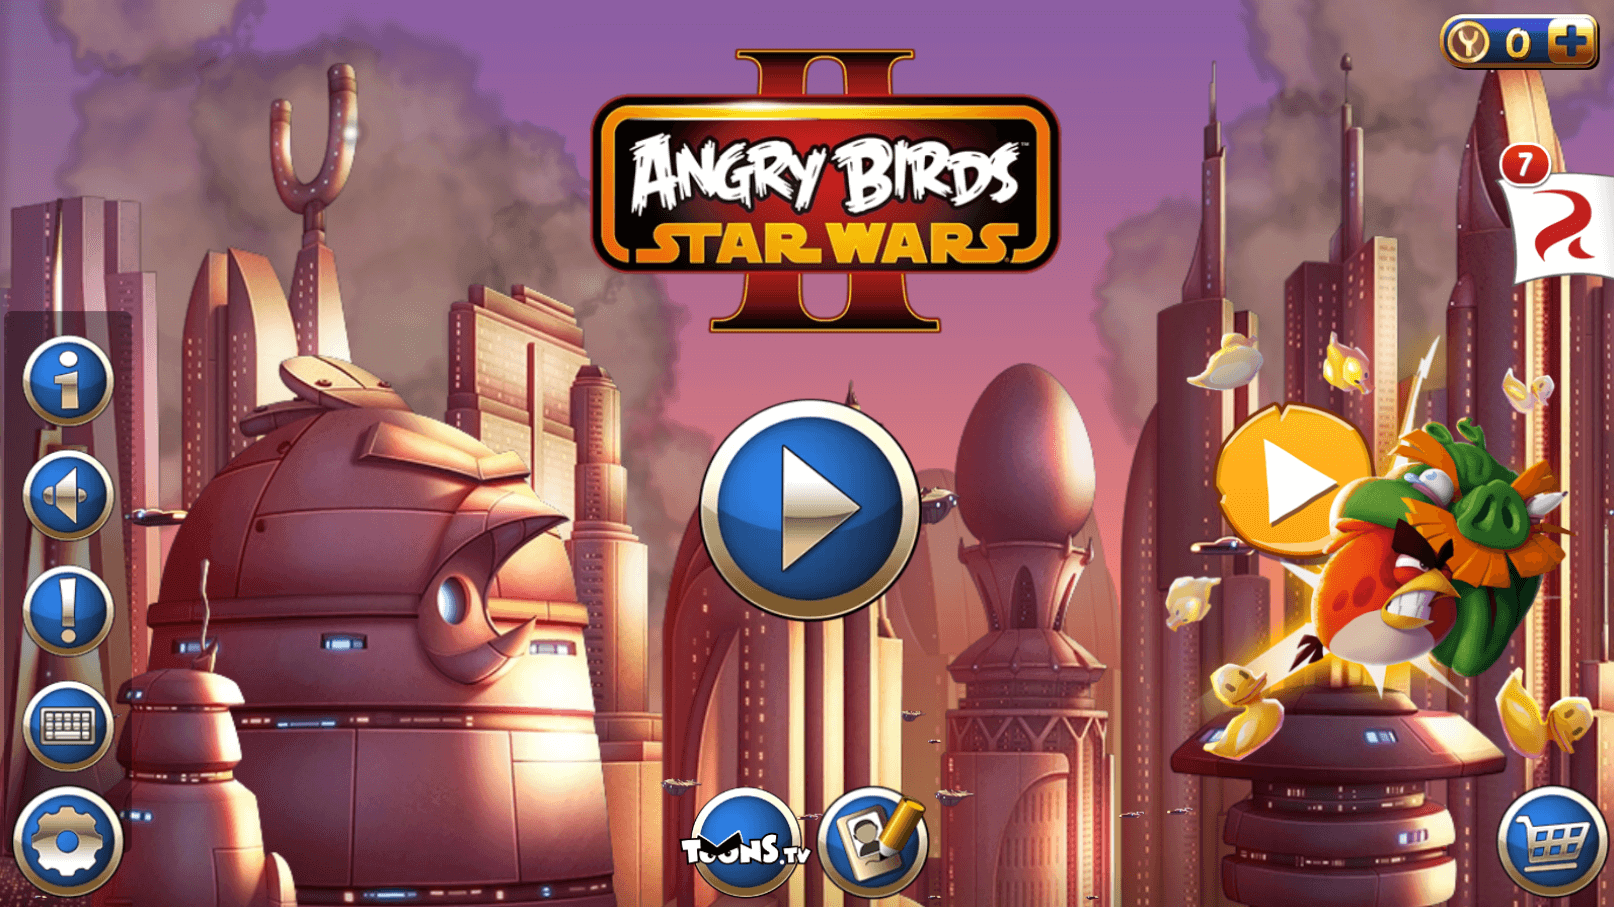 Angry birds star wars games free download